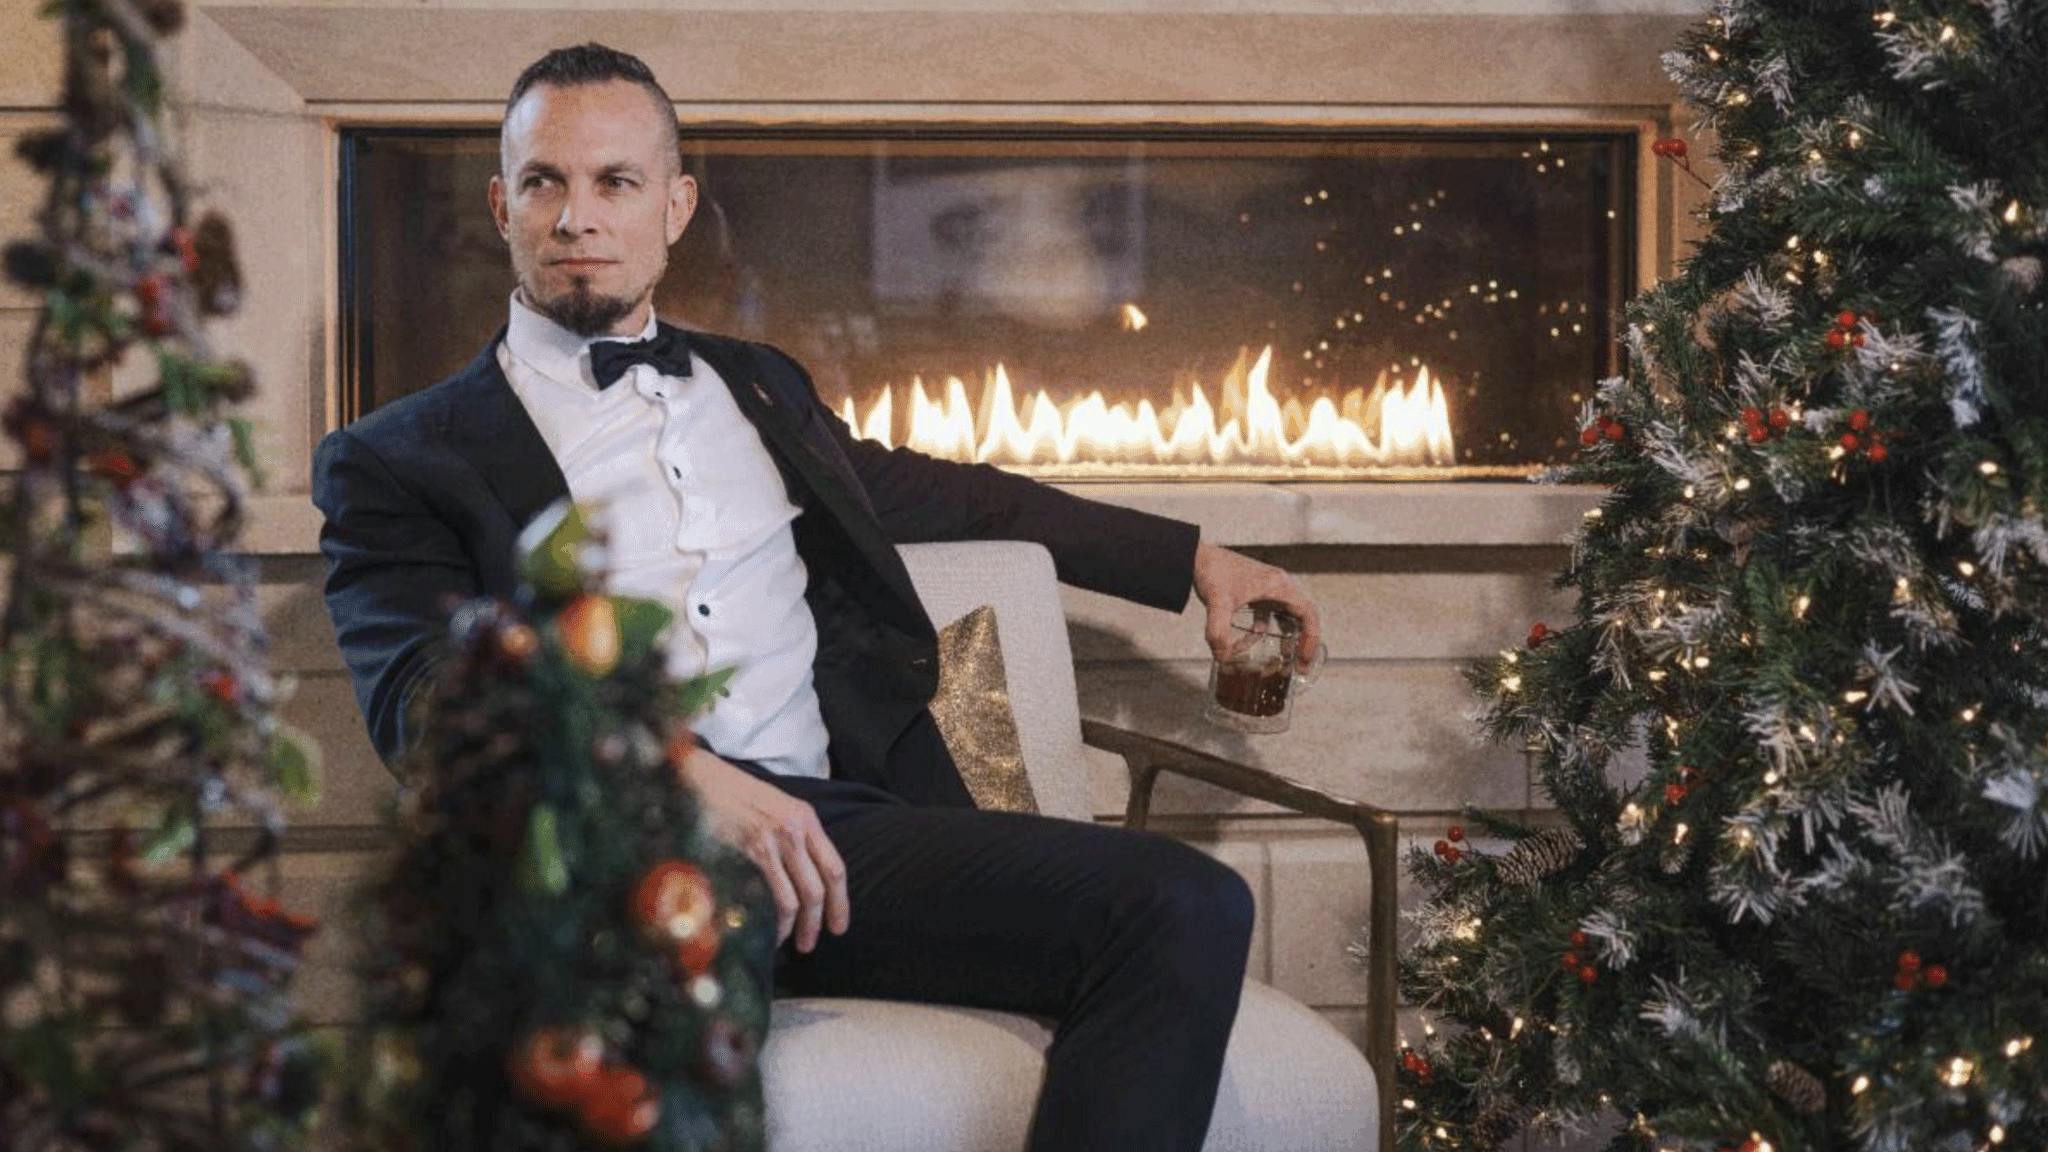 Hear Mark Tremonti’s cover of The Most Wonderful Time Of The Year